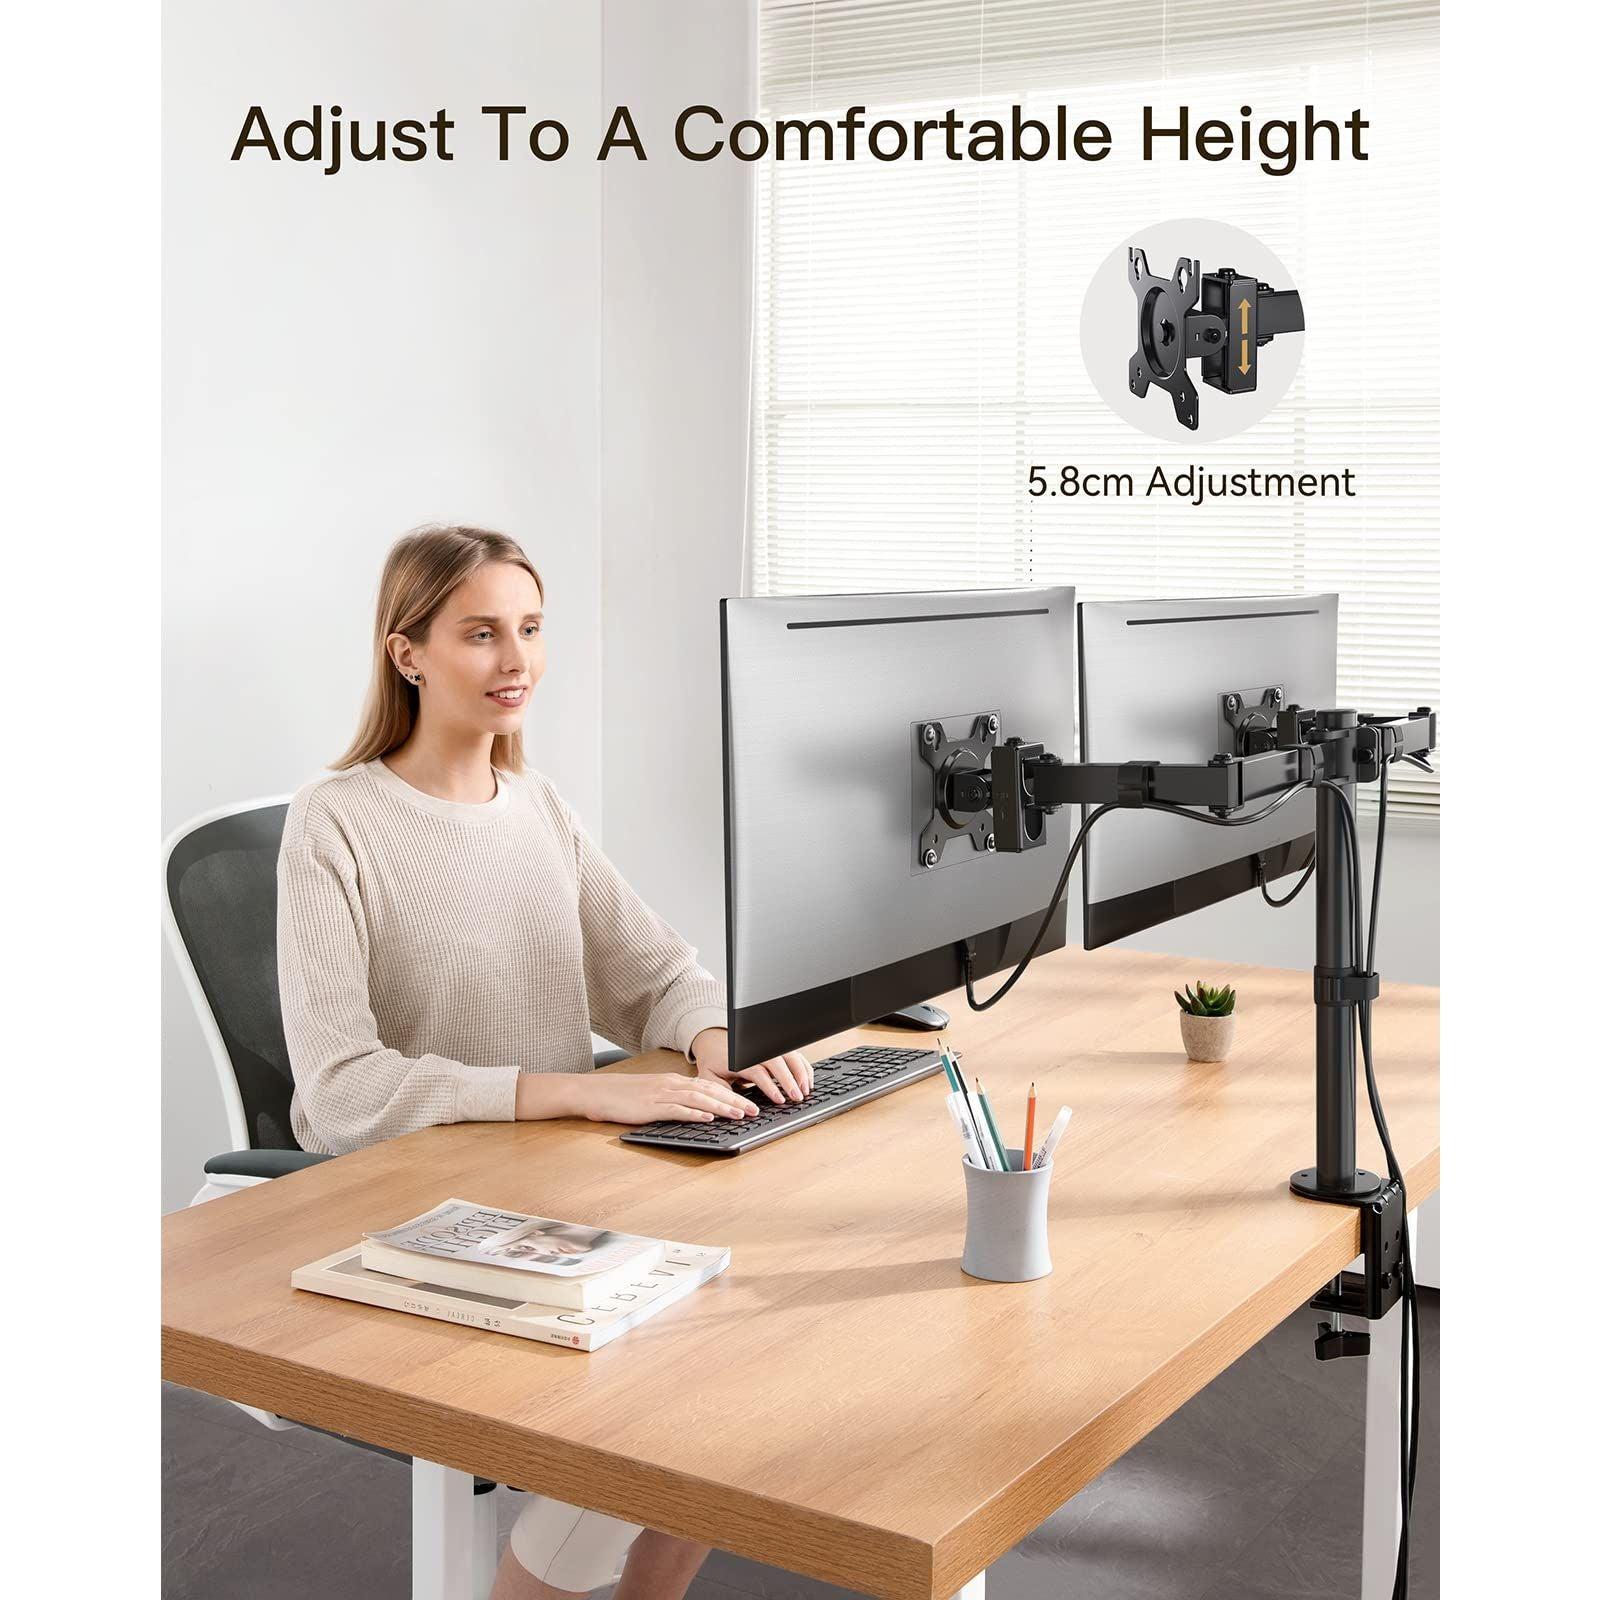 Relaxact Dual Monitor Arm for 17-32 inch LCD LED PC Screens, Ergonomic Double Monitor Stand for Desks, Fully Adjustable Desk Mount, Up to 8 kg per Arm, Tilt 90° Swivel 180° Rotate 360°, VESA 75/100 3